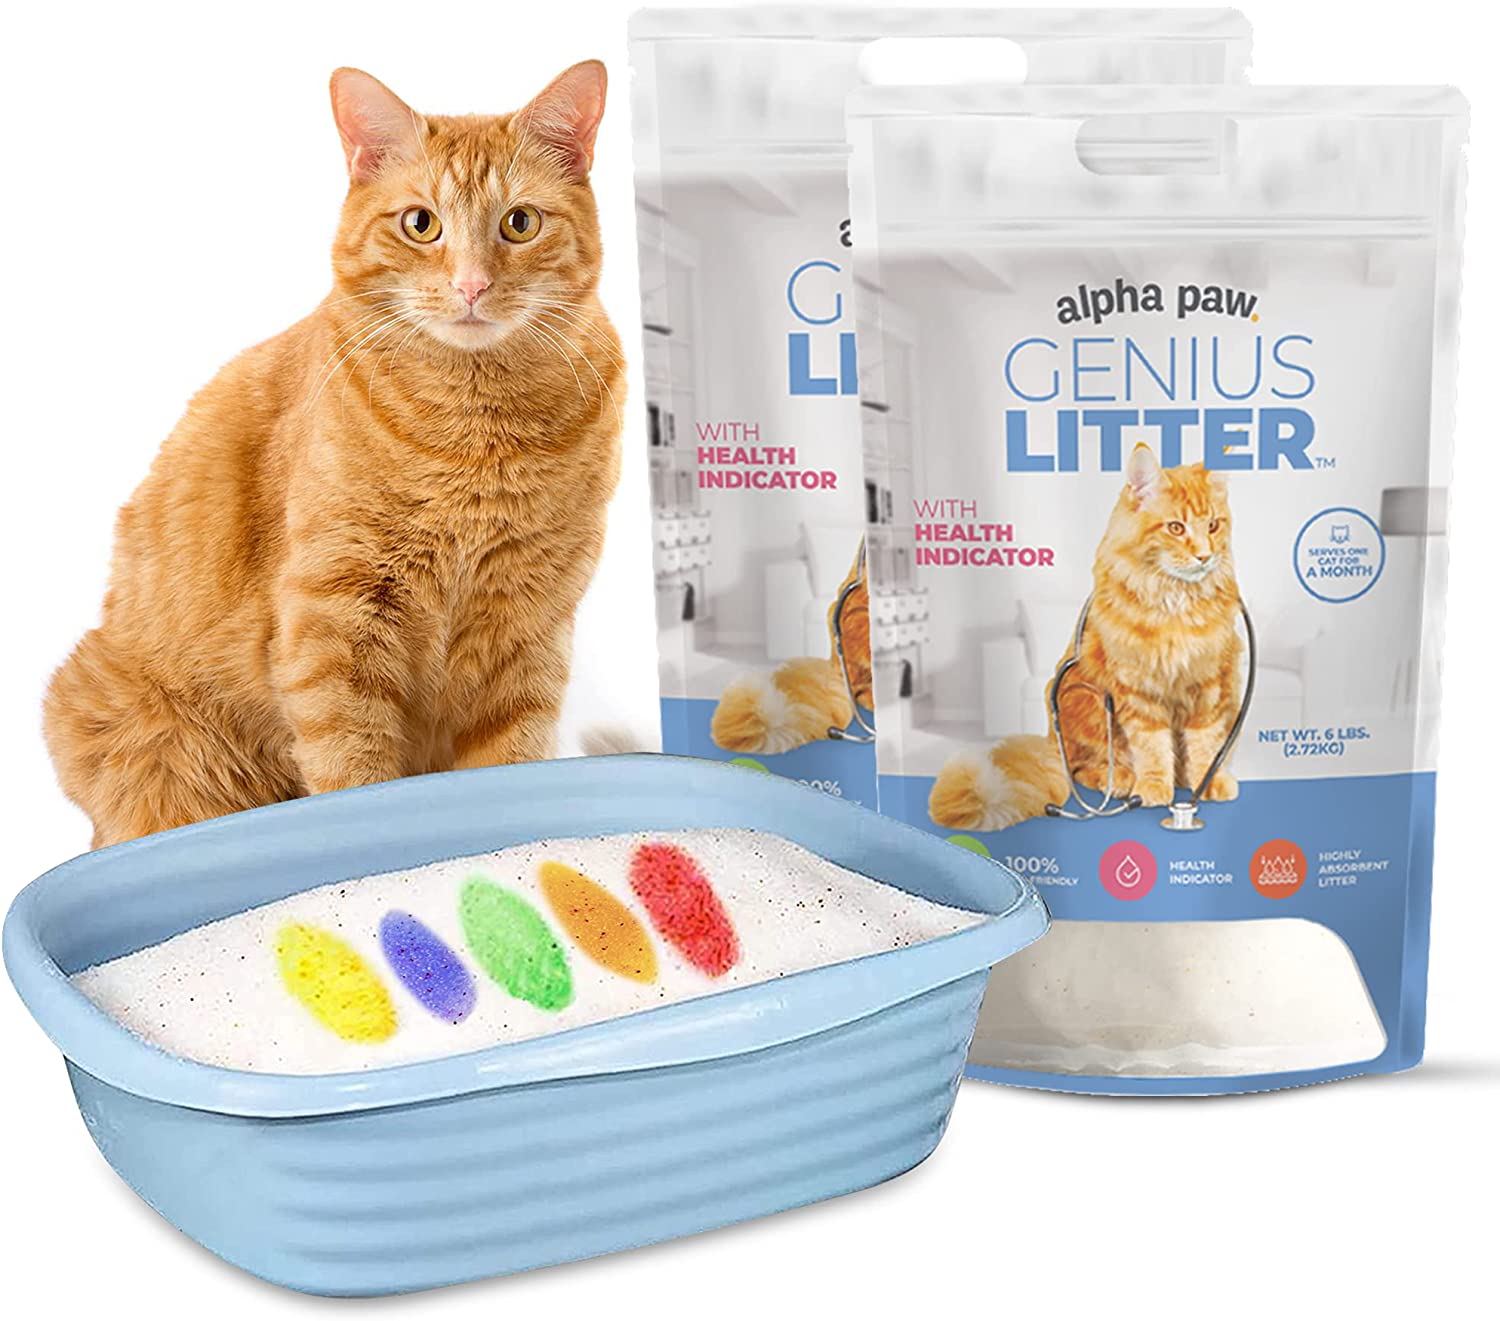 Alpha Paw Genius Cat Litter 5-Color Health Indicator Unscented (12 lbs)